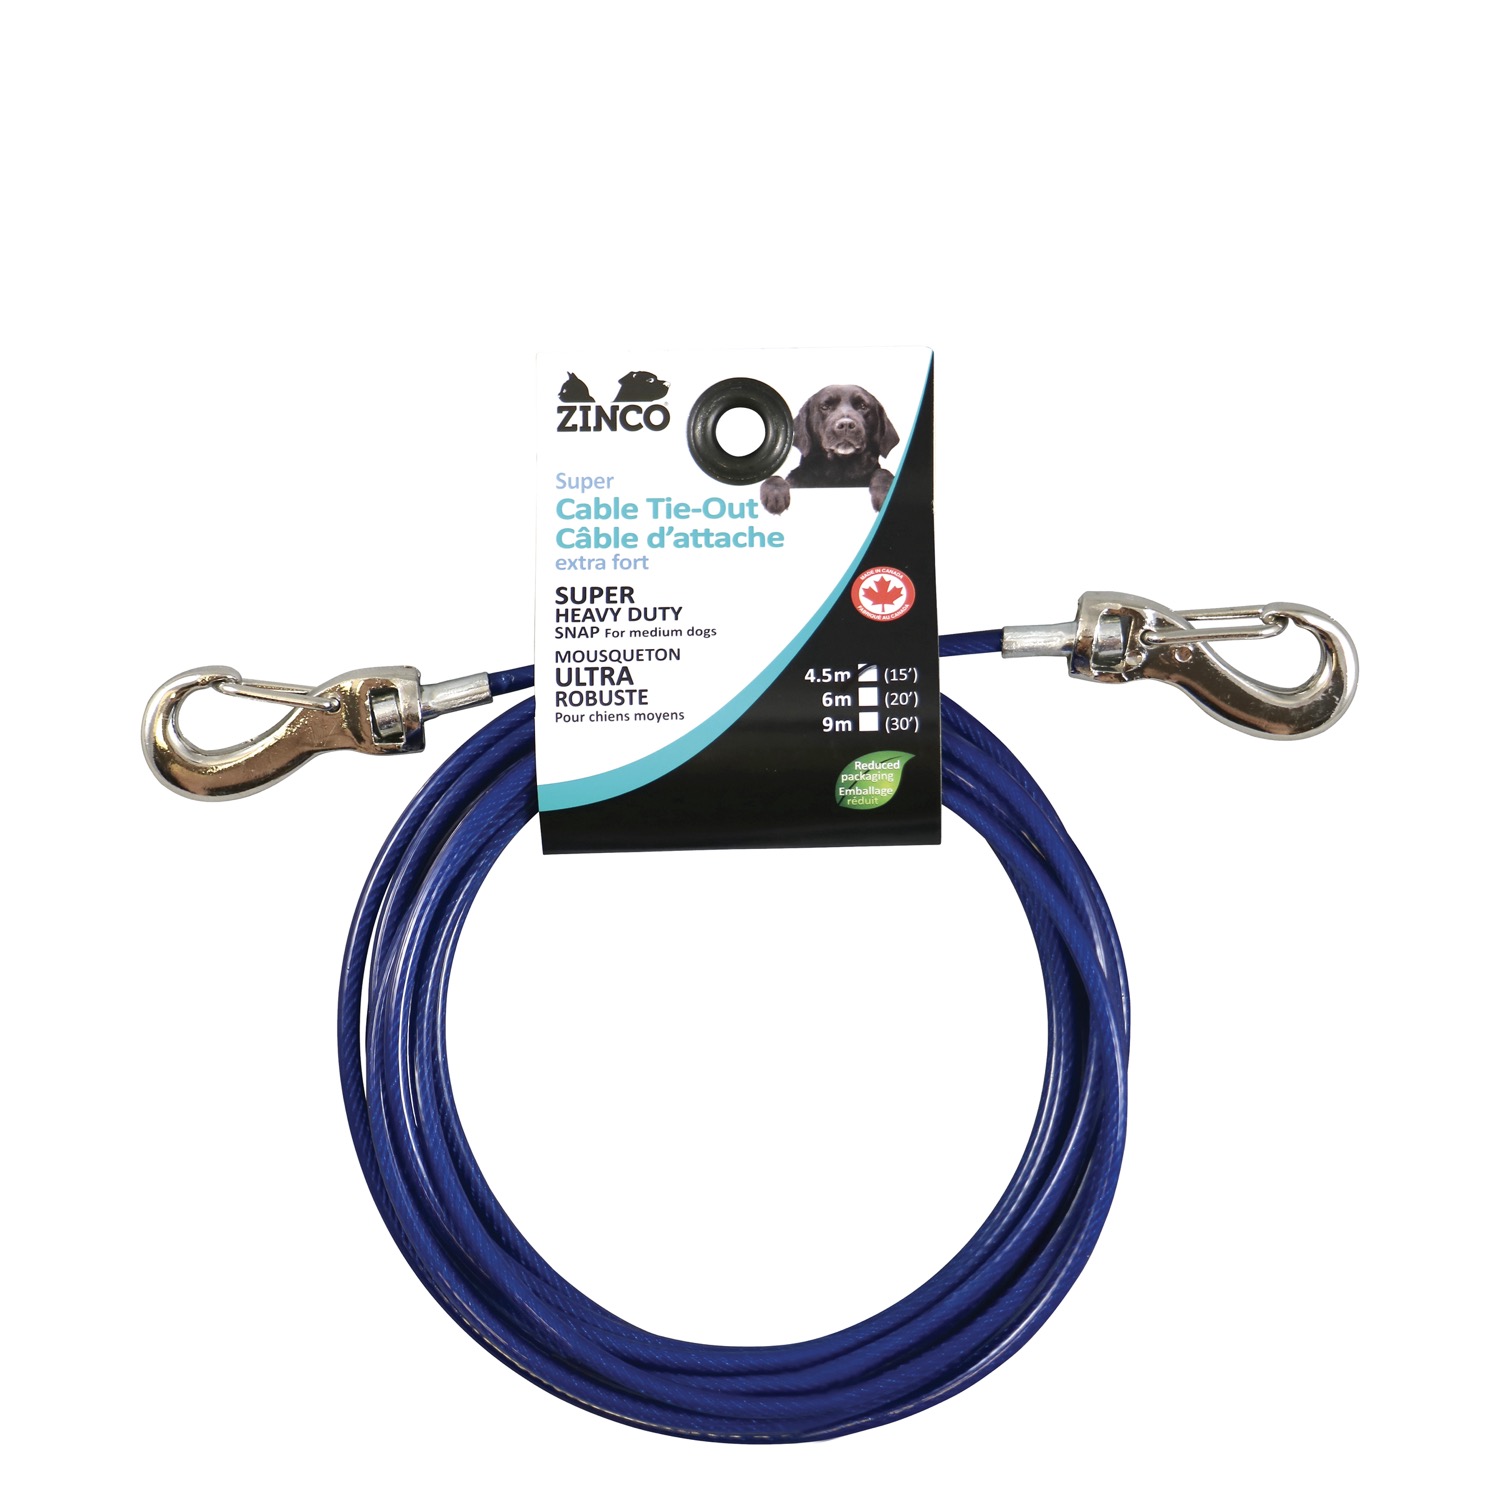 Cable tie-out for small dogs Zinco 011 BLU | Mondou